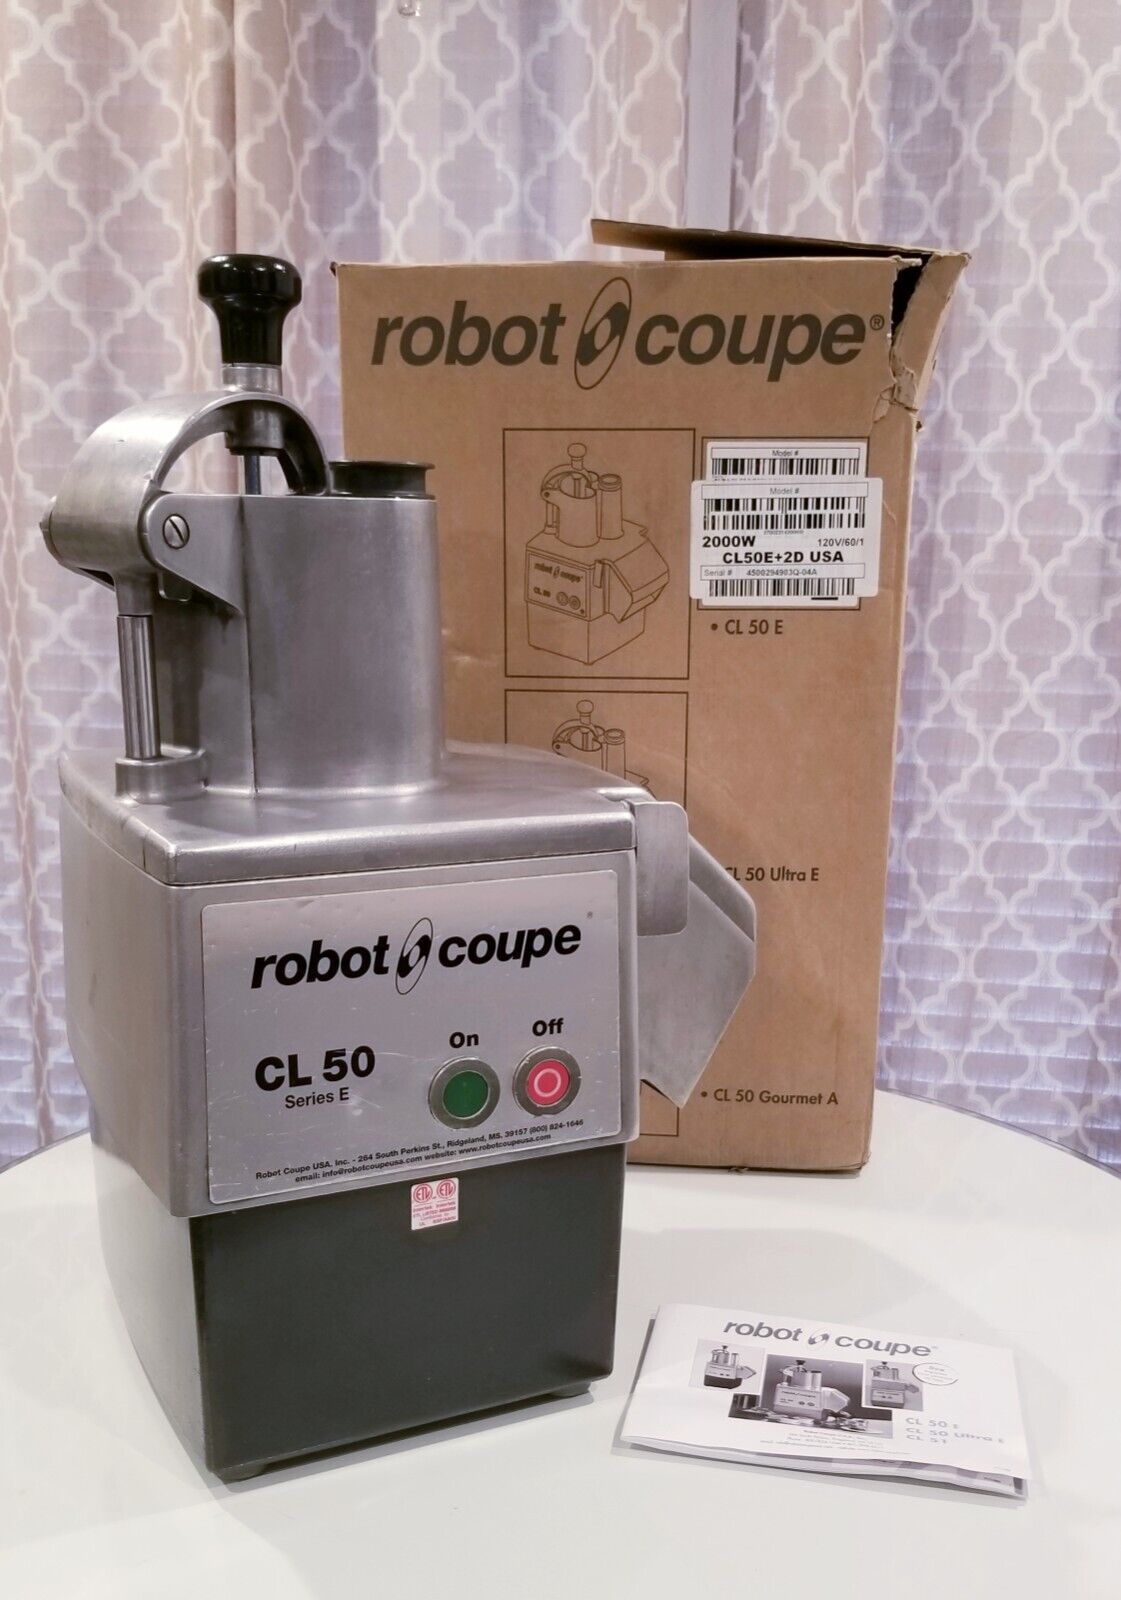 Robot Coupe CL50E CL 50 Series E Continuous Feed Commercial Food Processor L@@K